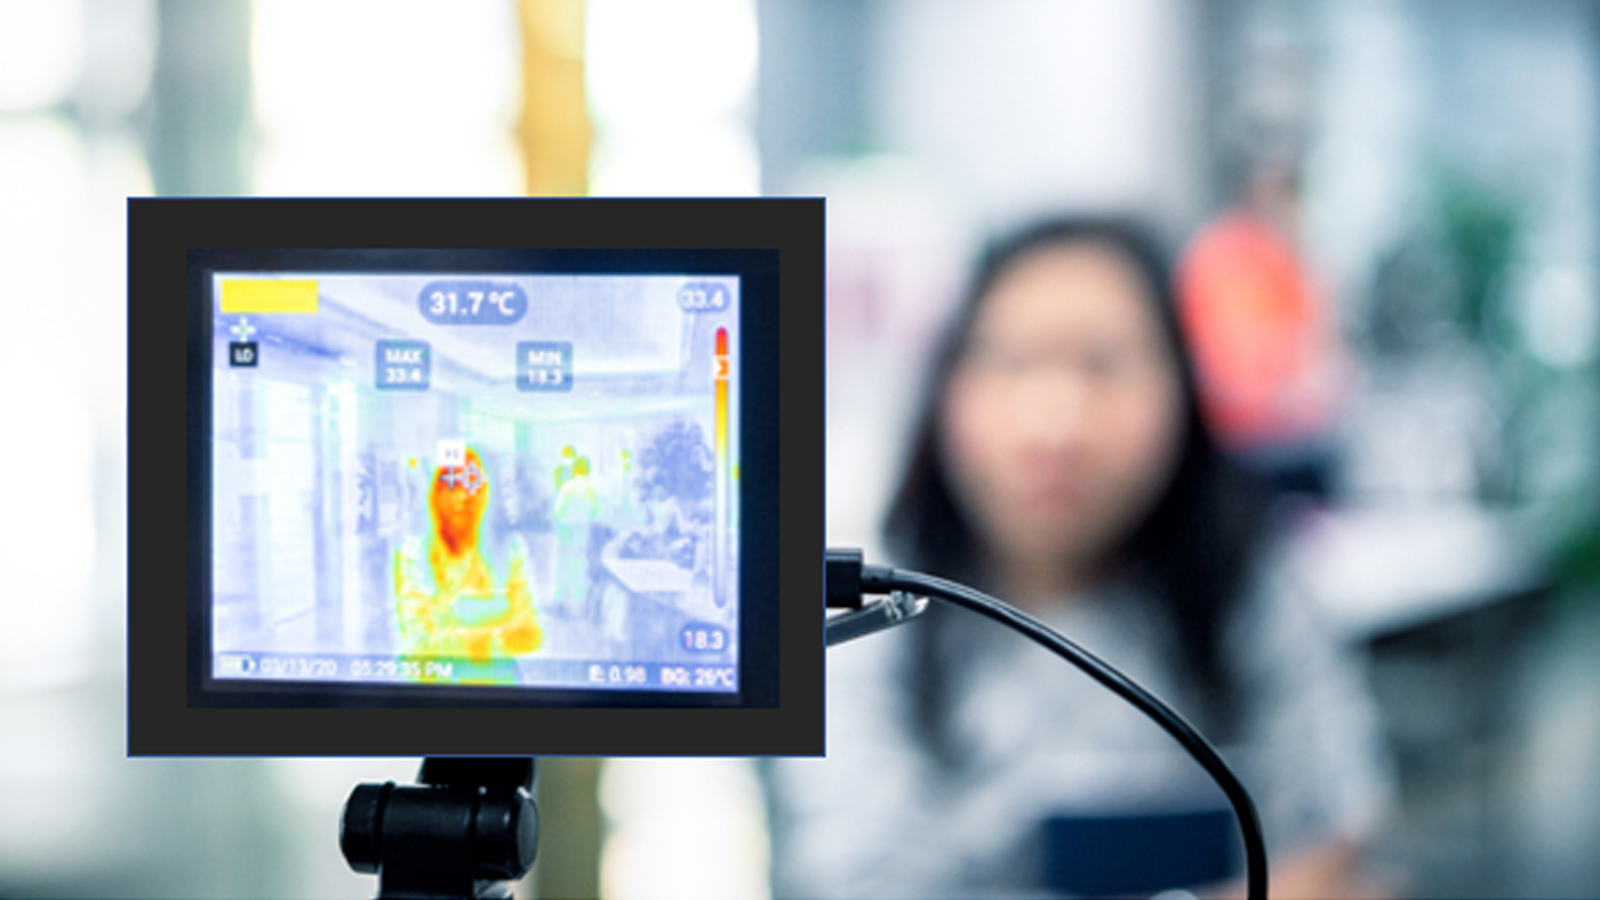 Figure one: A picture of an infrared thermal camera pointed at a woman standing by herself in a public space. The camera displays her thermal image on the camera screen. Her face is shown on the screen in a reddish orange color indicating her skin has a higher surface temperature than her clothing displayed as yellow and the distant background displayed as gray. The temperature displayed on the screen as 31.7o Celsius. 